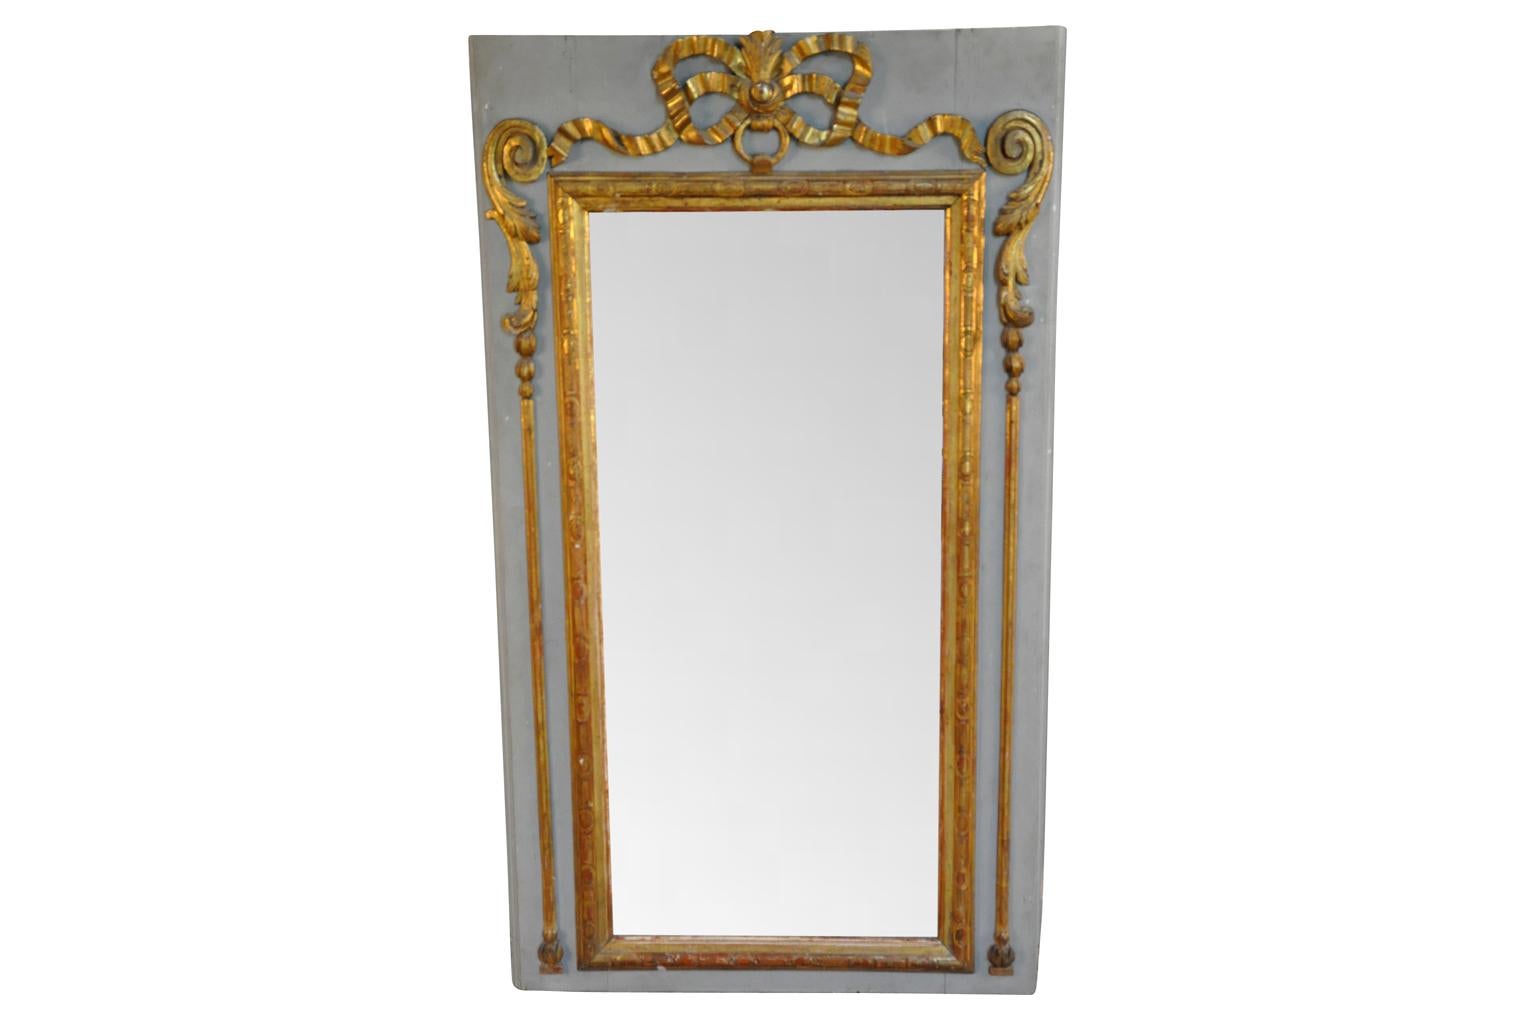 A very lovely later 18th century French Louis XVI period Trumeau mirror beautifully constructed from painted and gilt wood. The mirror retains its original mercury glass. Wonderful patina.